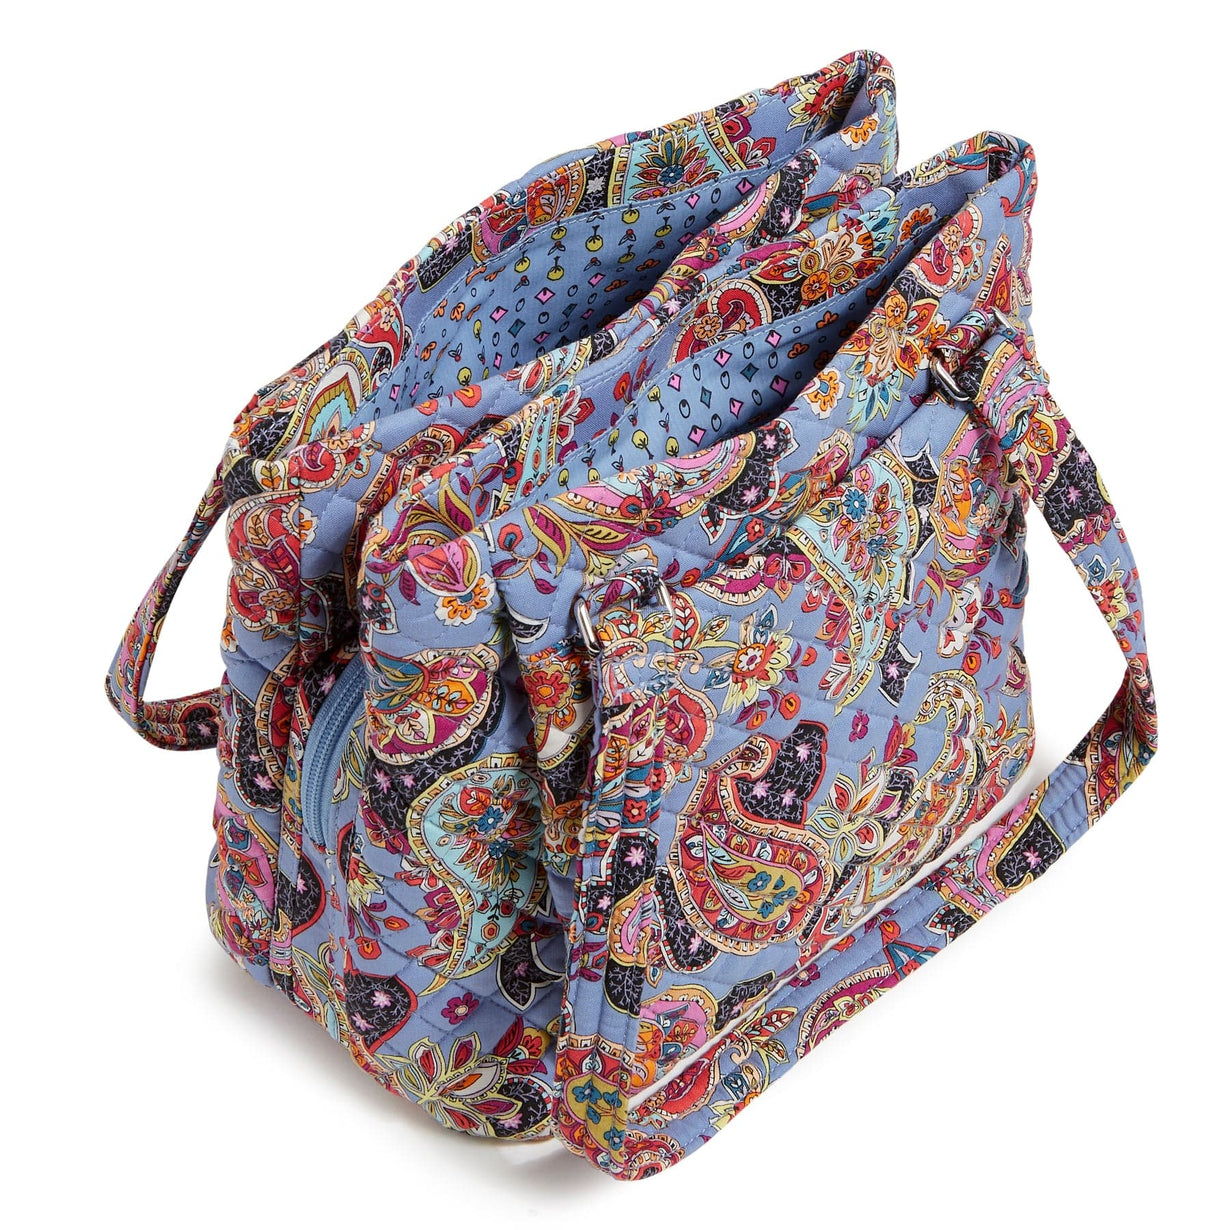 Multi-Compartment Shoulder Bag - Recycled Cotton | Vera Bradley